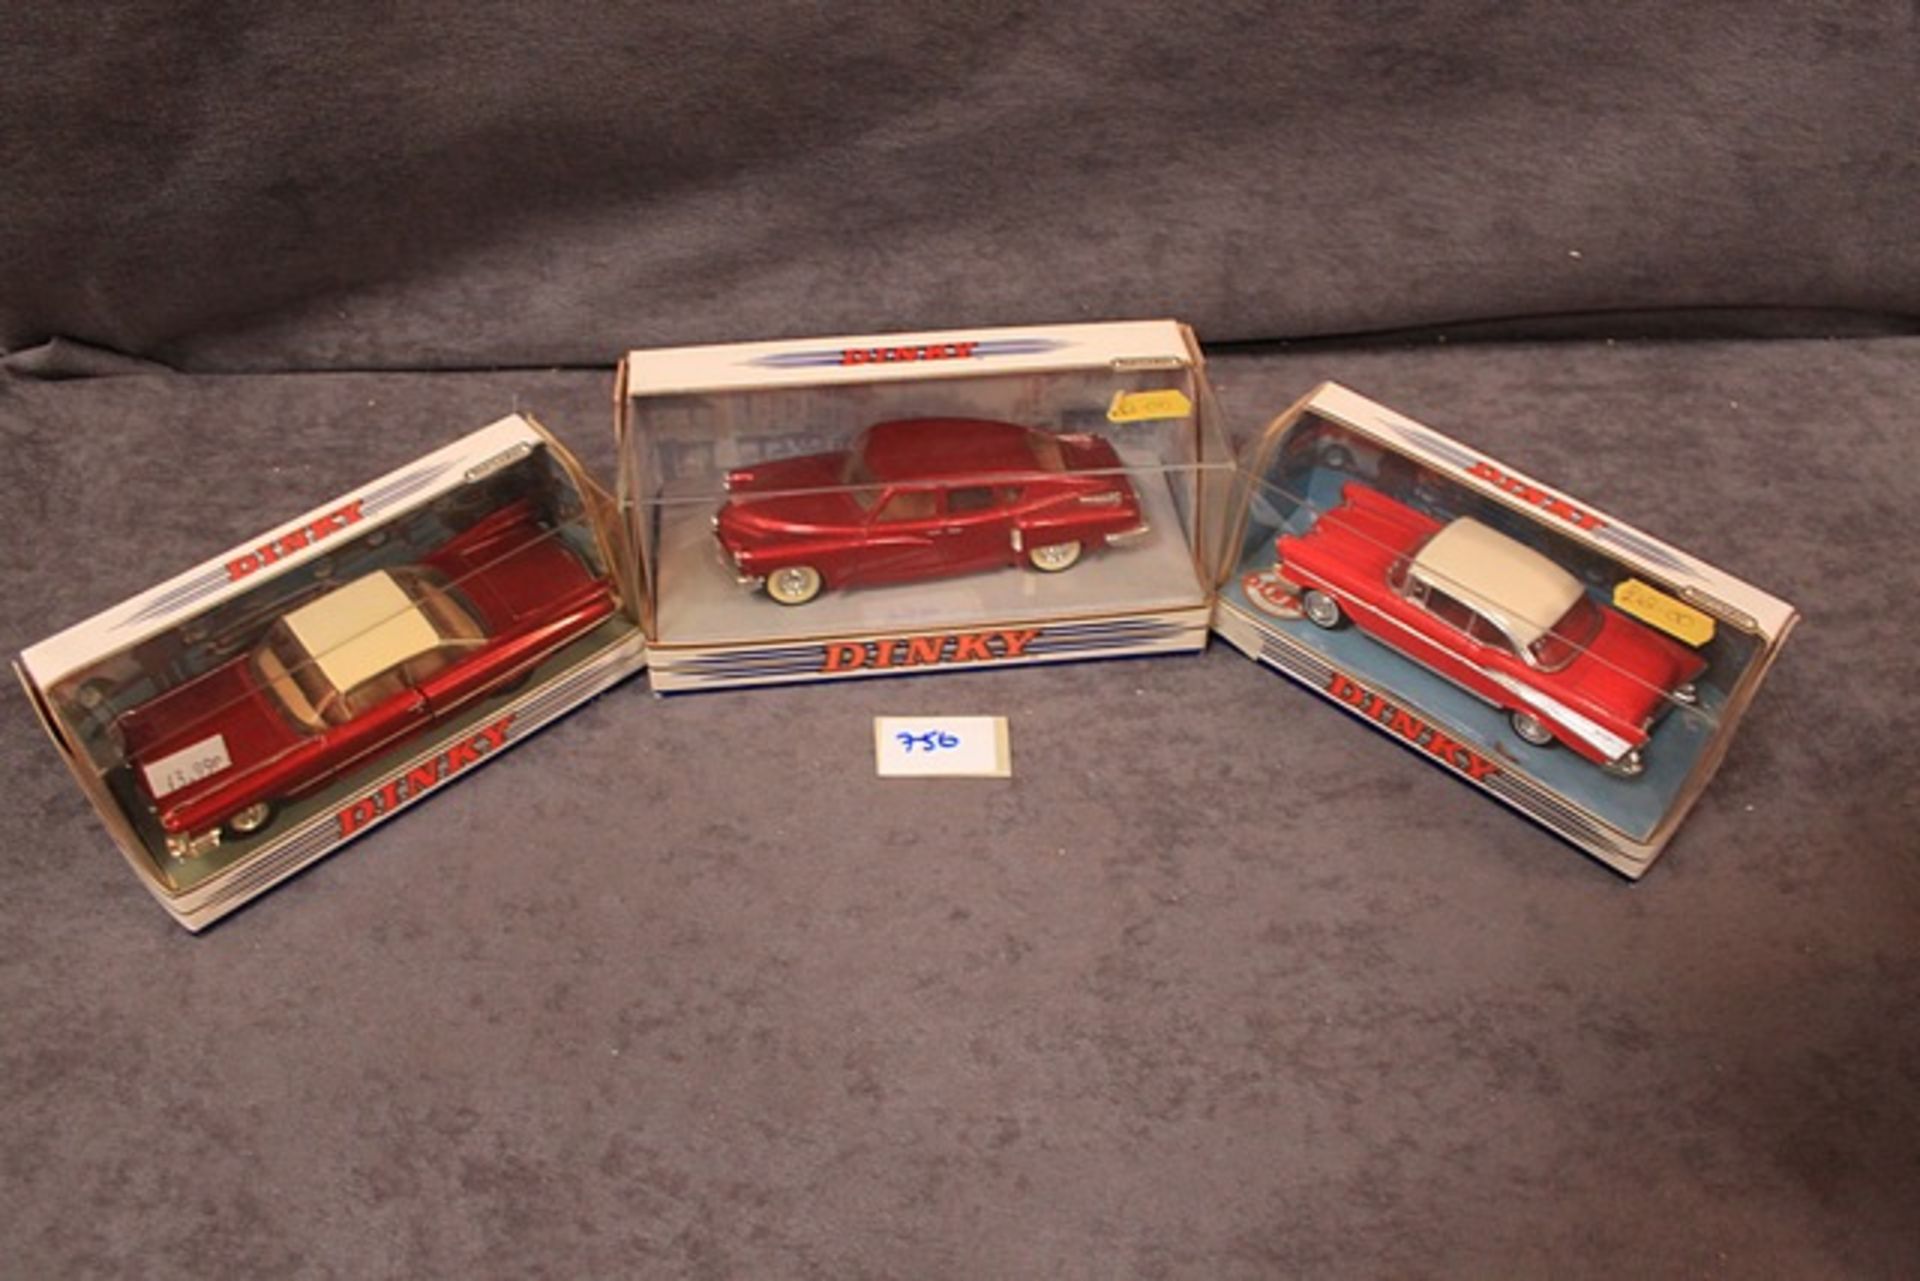 3x Dinky Comprising Of; #DDY-2 Chevrolet Bel Air 1957, #DY-7 1959 Cadillac Coupe De Ville, #DY-11